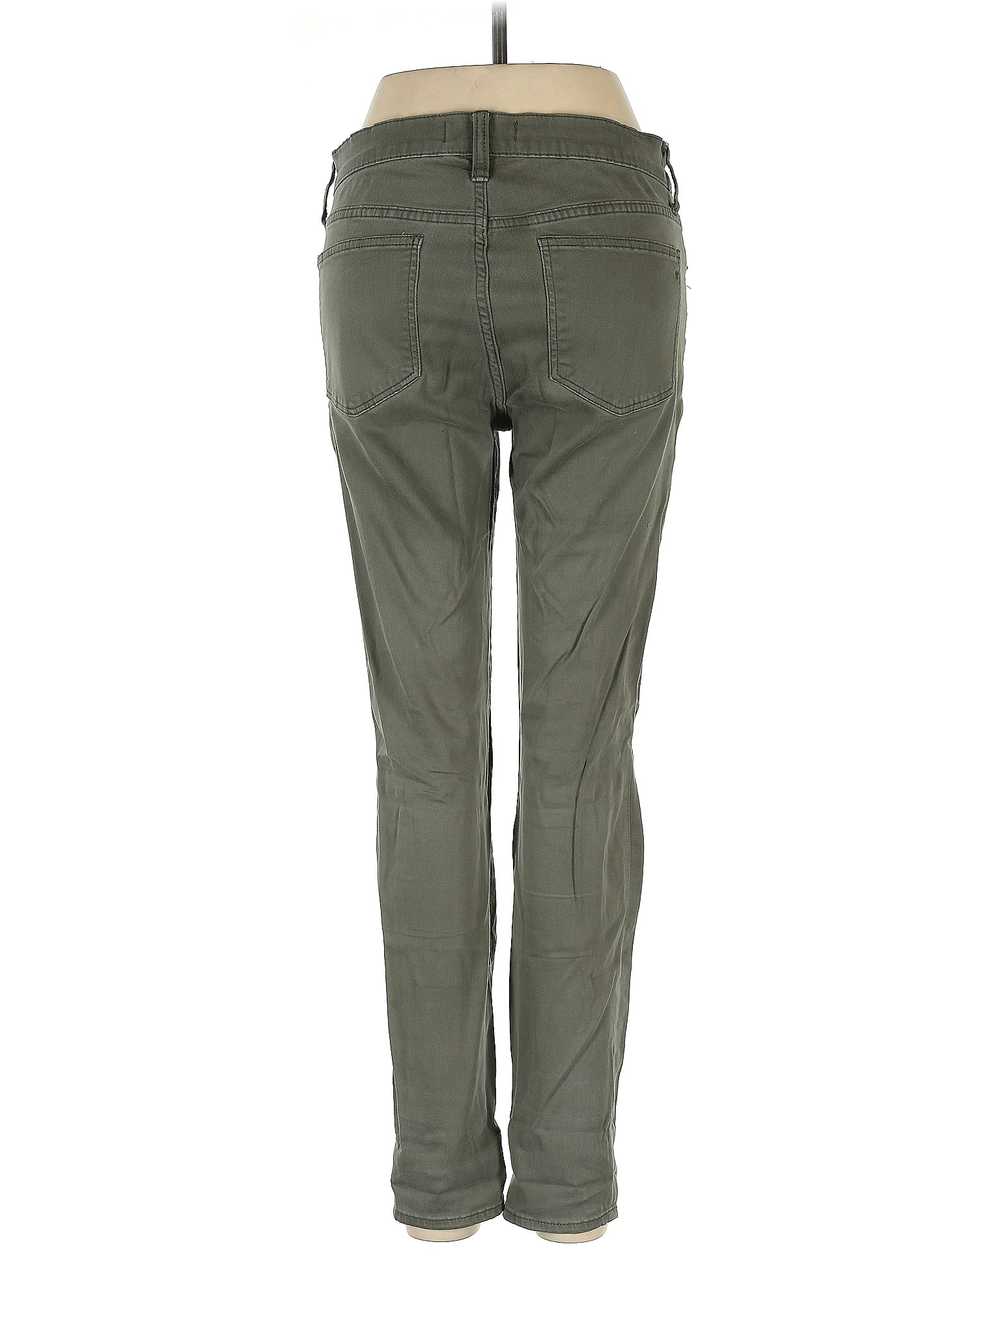 Madewell Women Green Jeans 28W - image 2